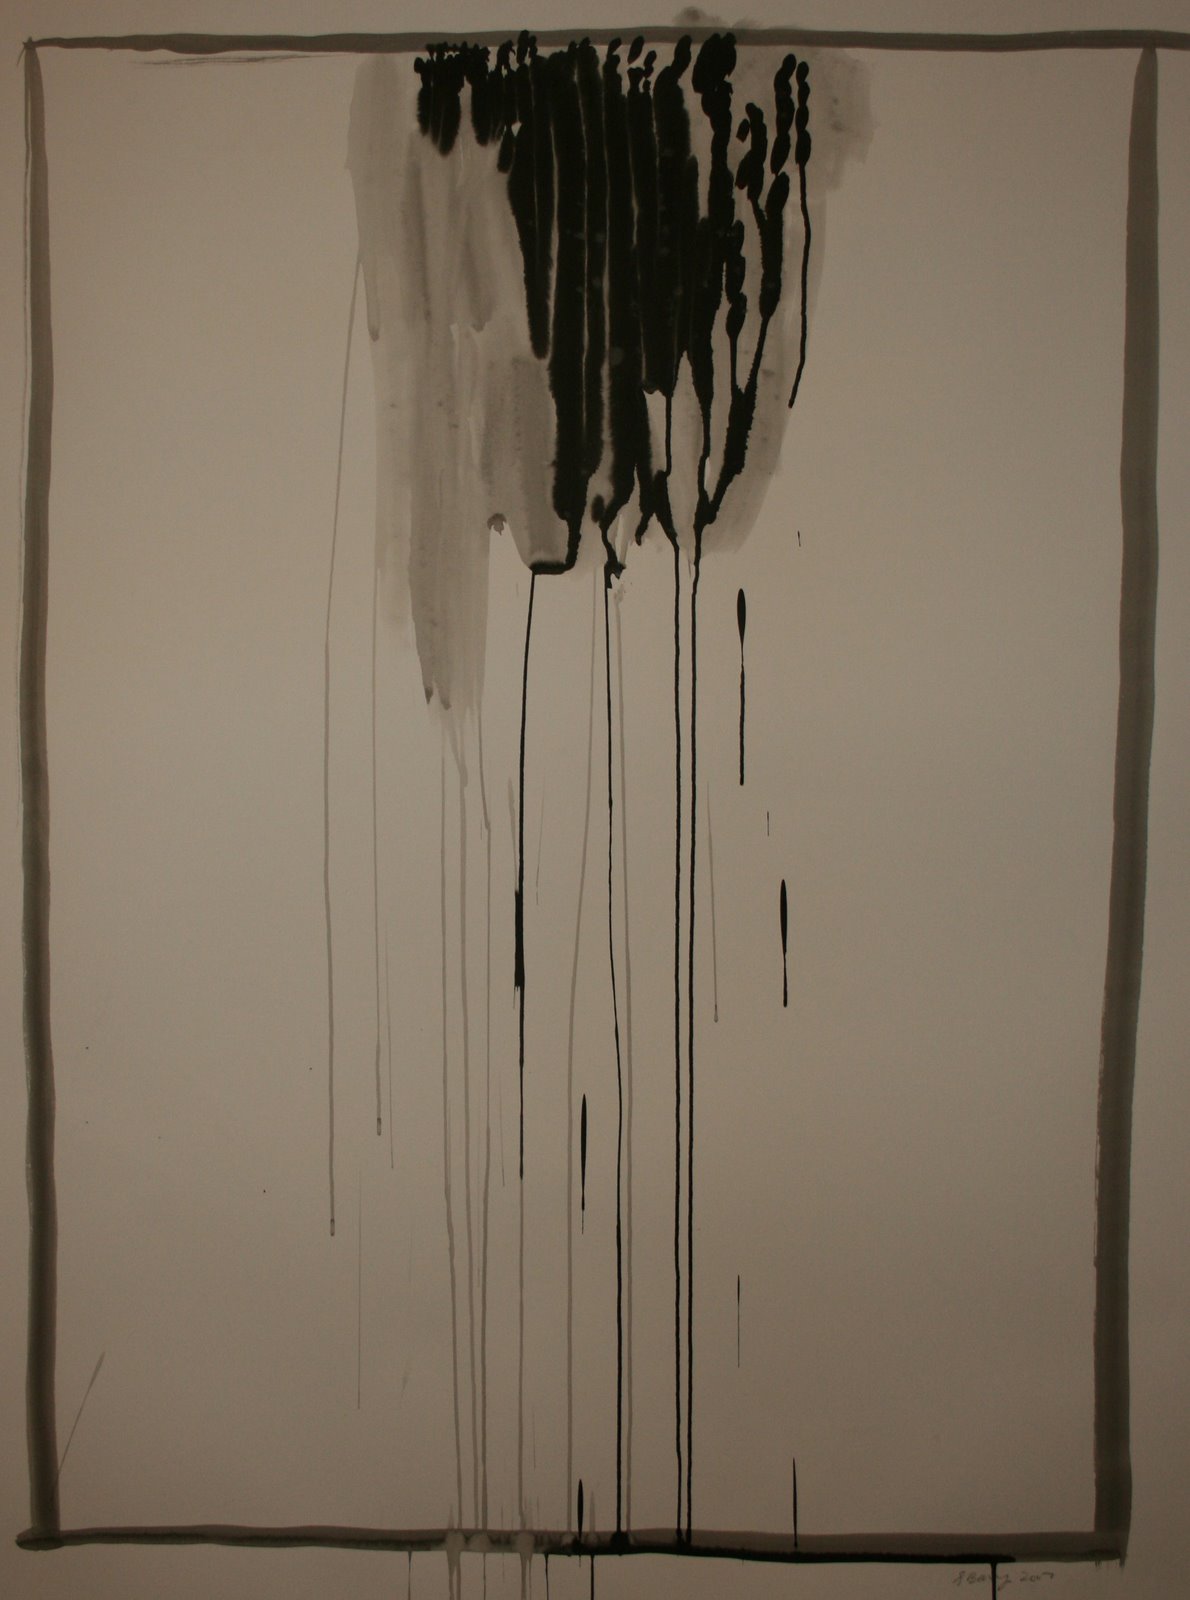 [Shannon+Barry_afterthought_sumi+ink+on+paper_38x50inches_2007.jpg]